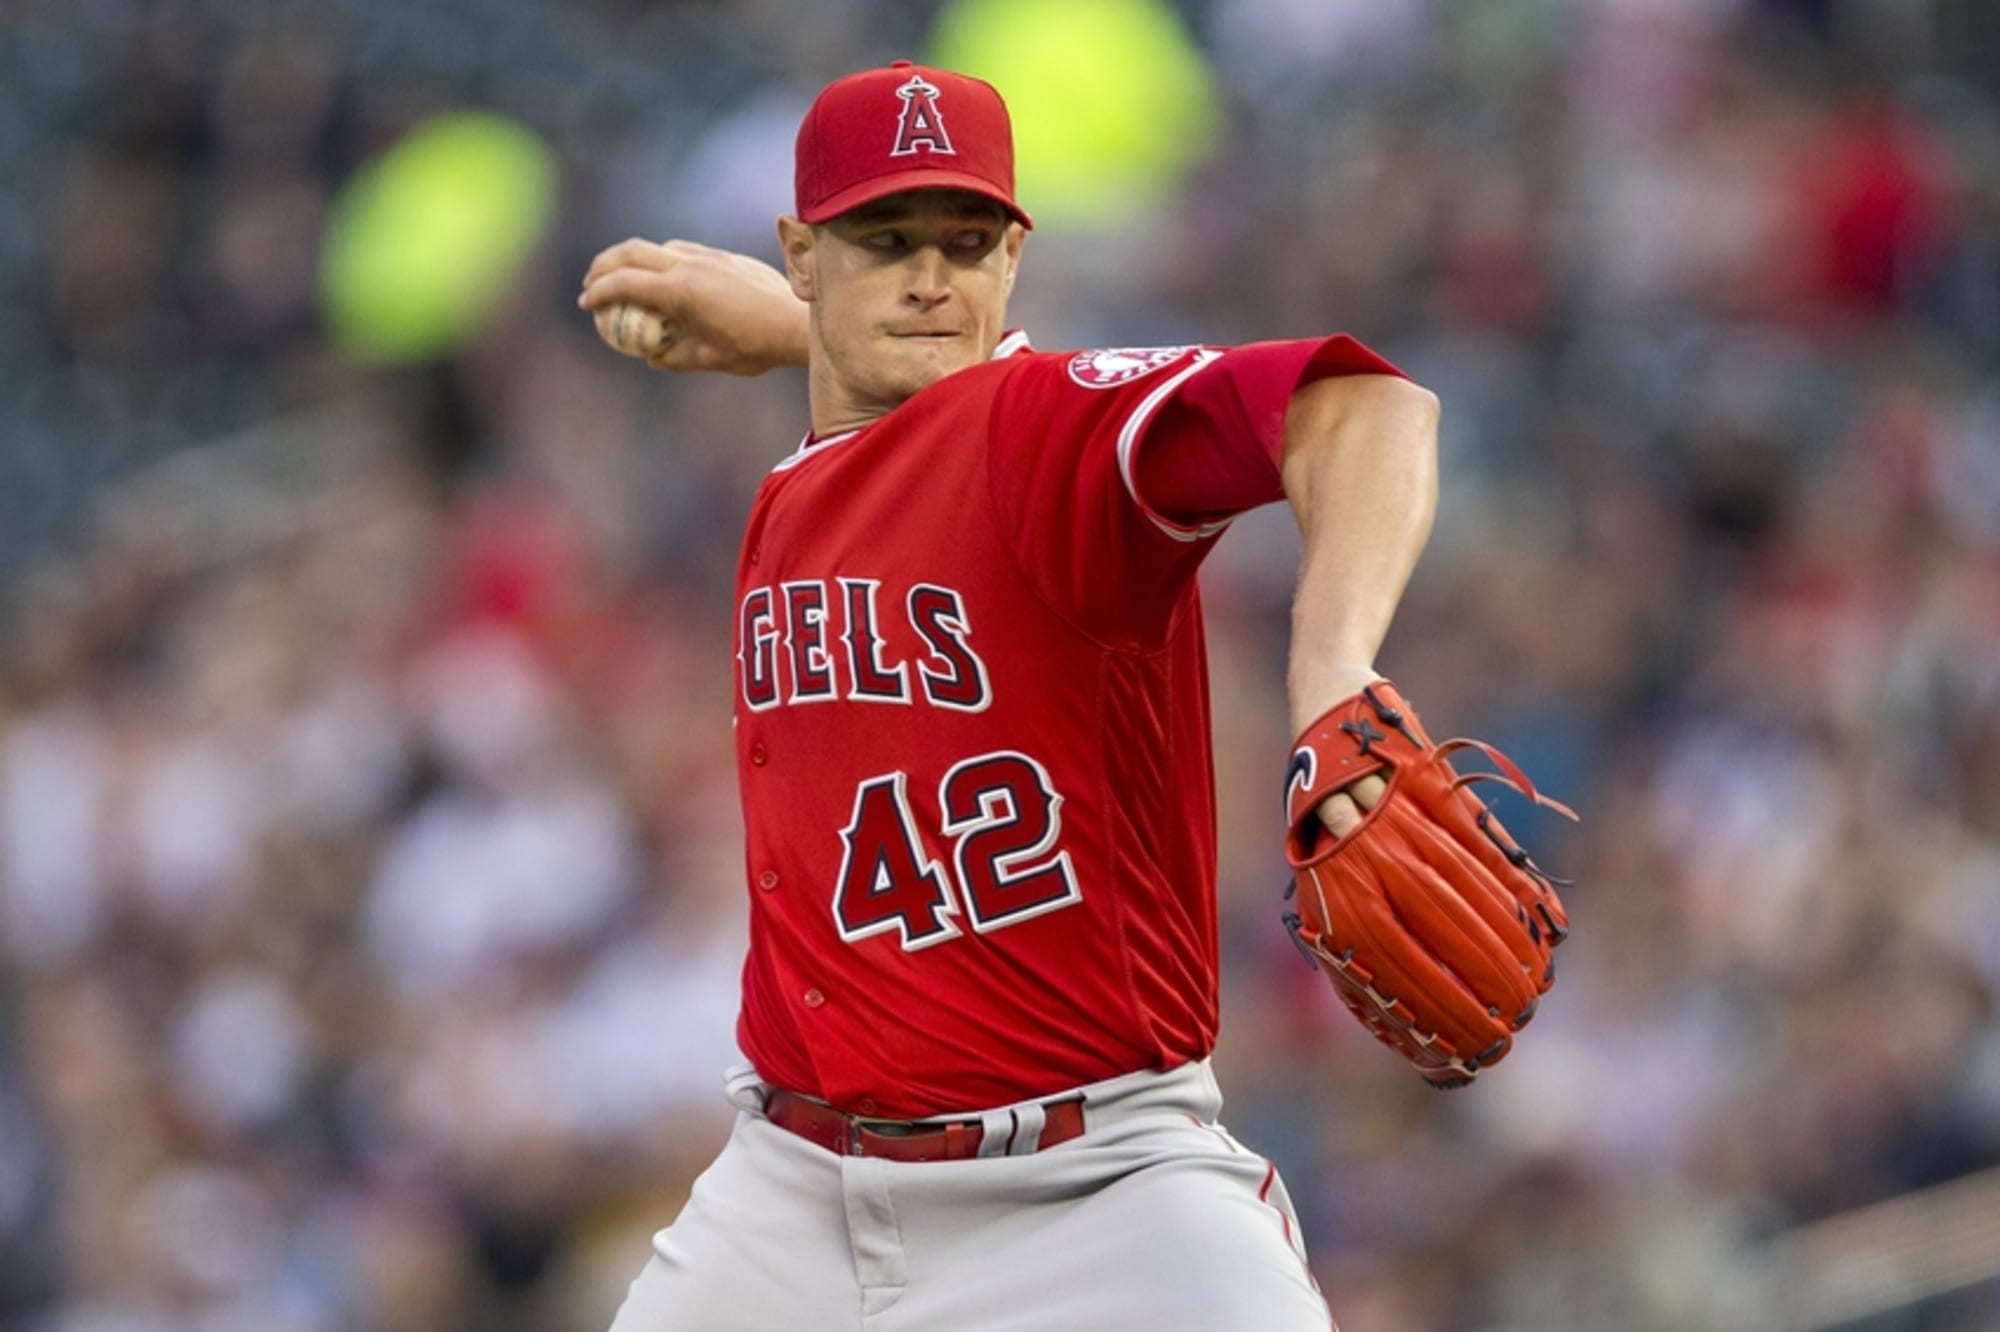 A's place Zach Jackson on injured list, designate Zach Neal for